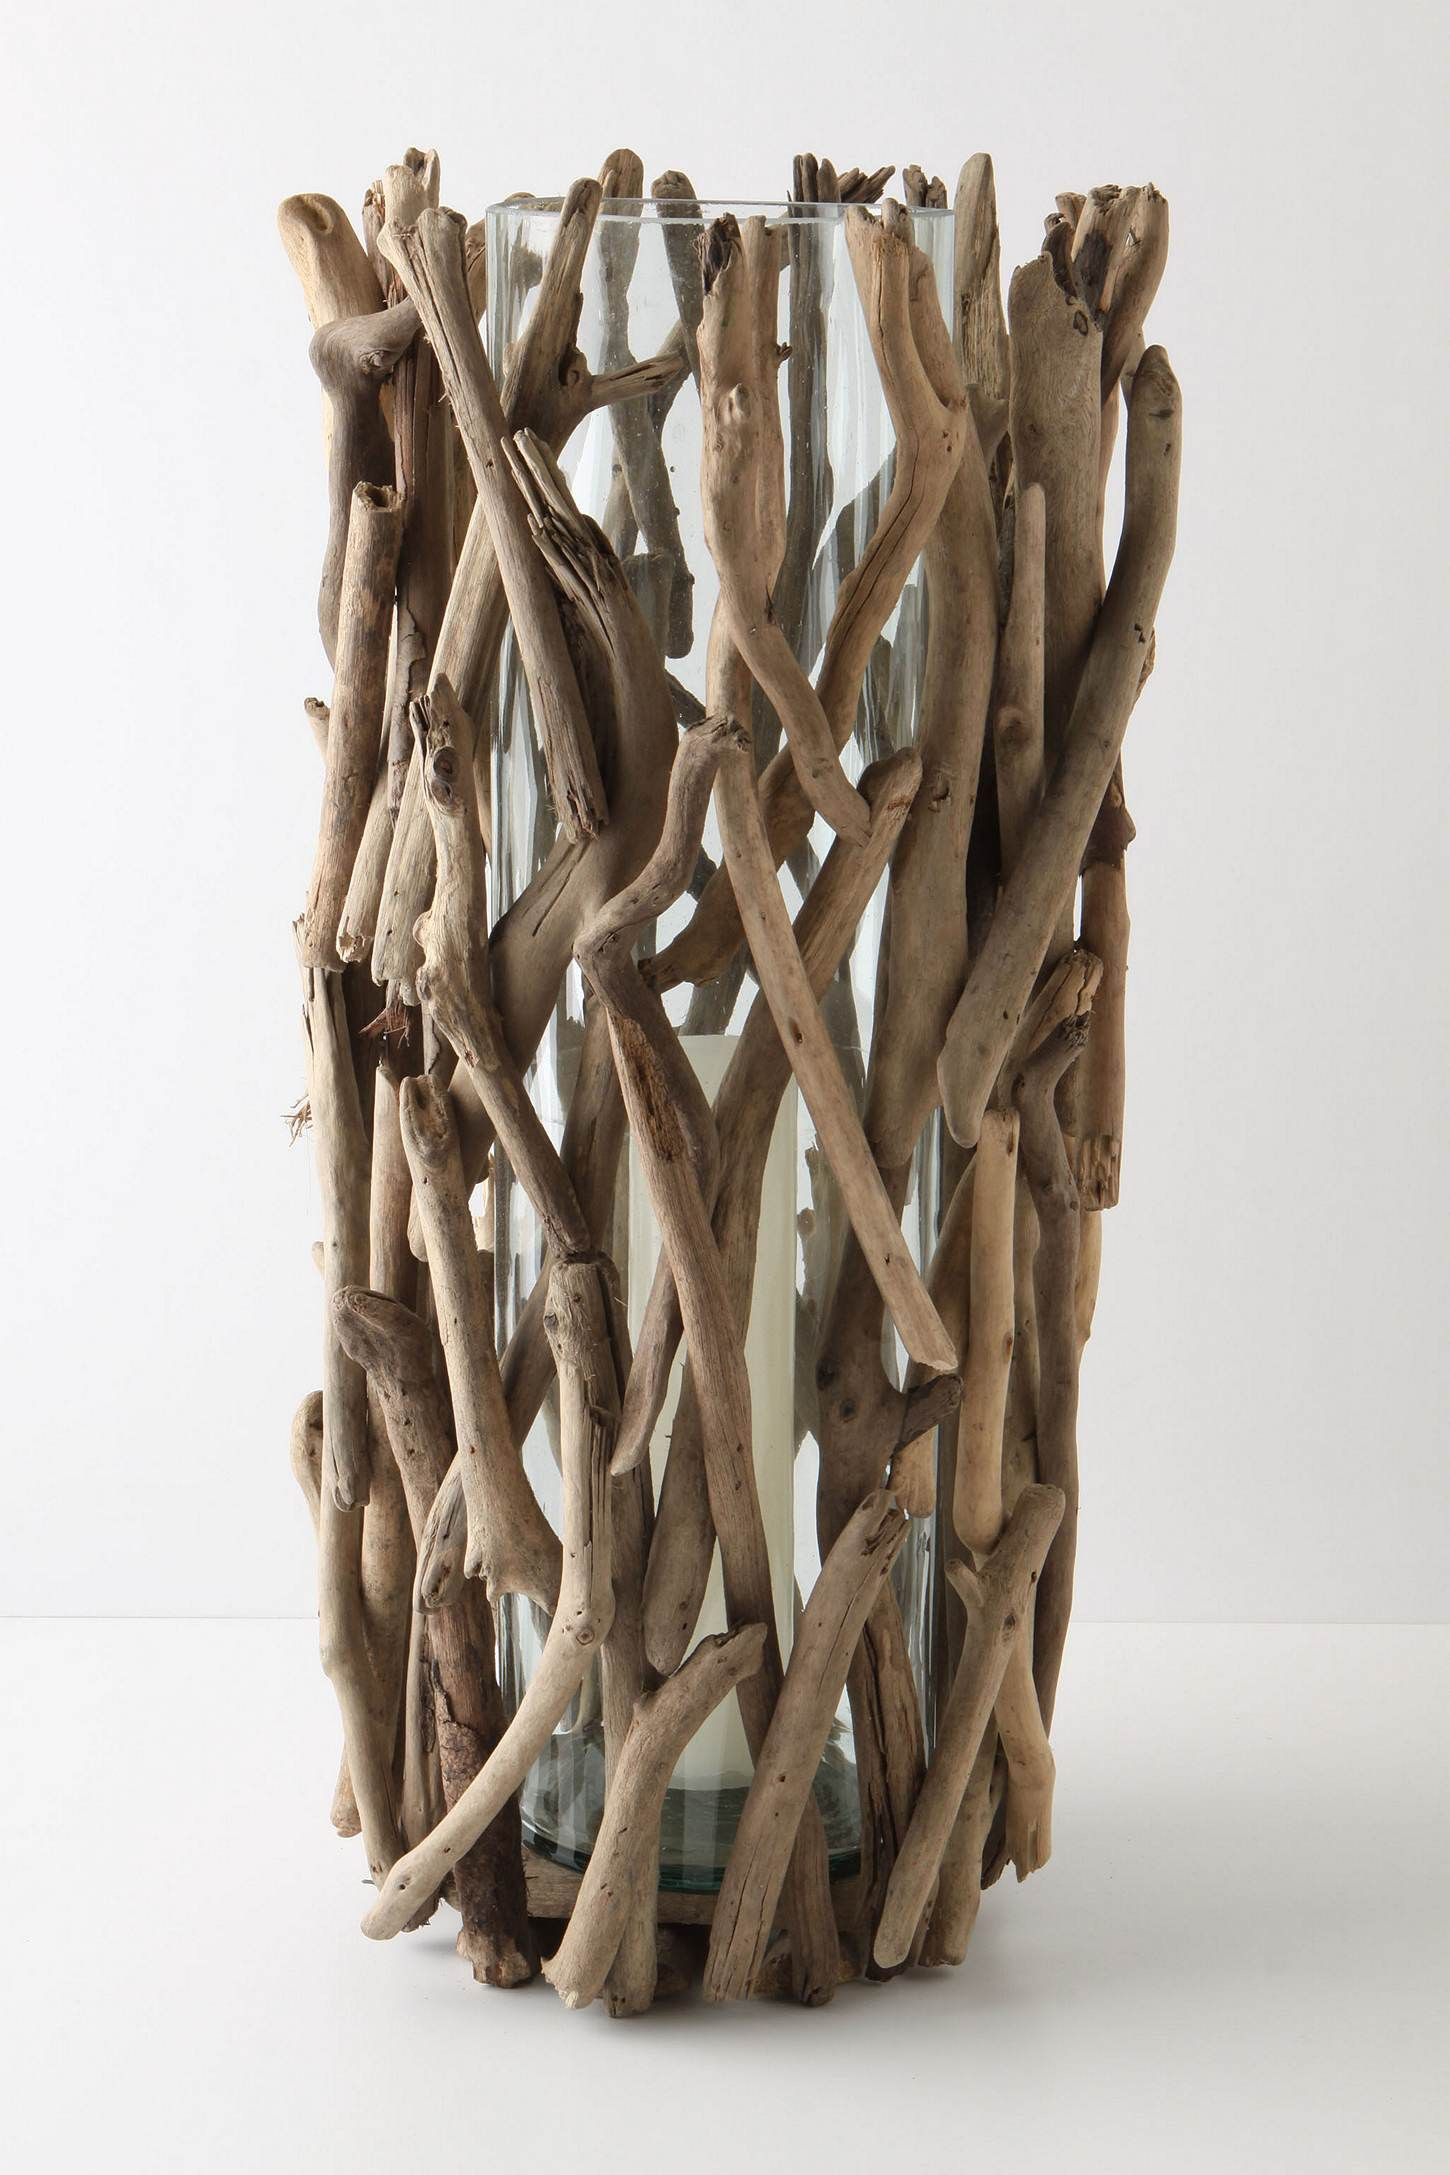 17 Recommended Branches for Vases 2024 free download branches for vases of driftwood hurricane tall all about driftwood decor pinterest with regard to driftwood vase